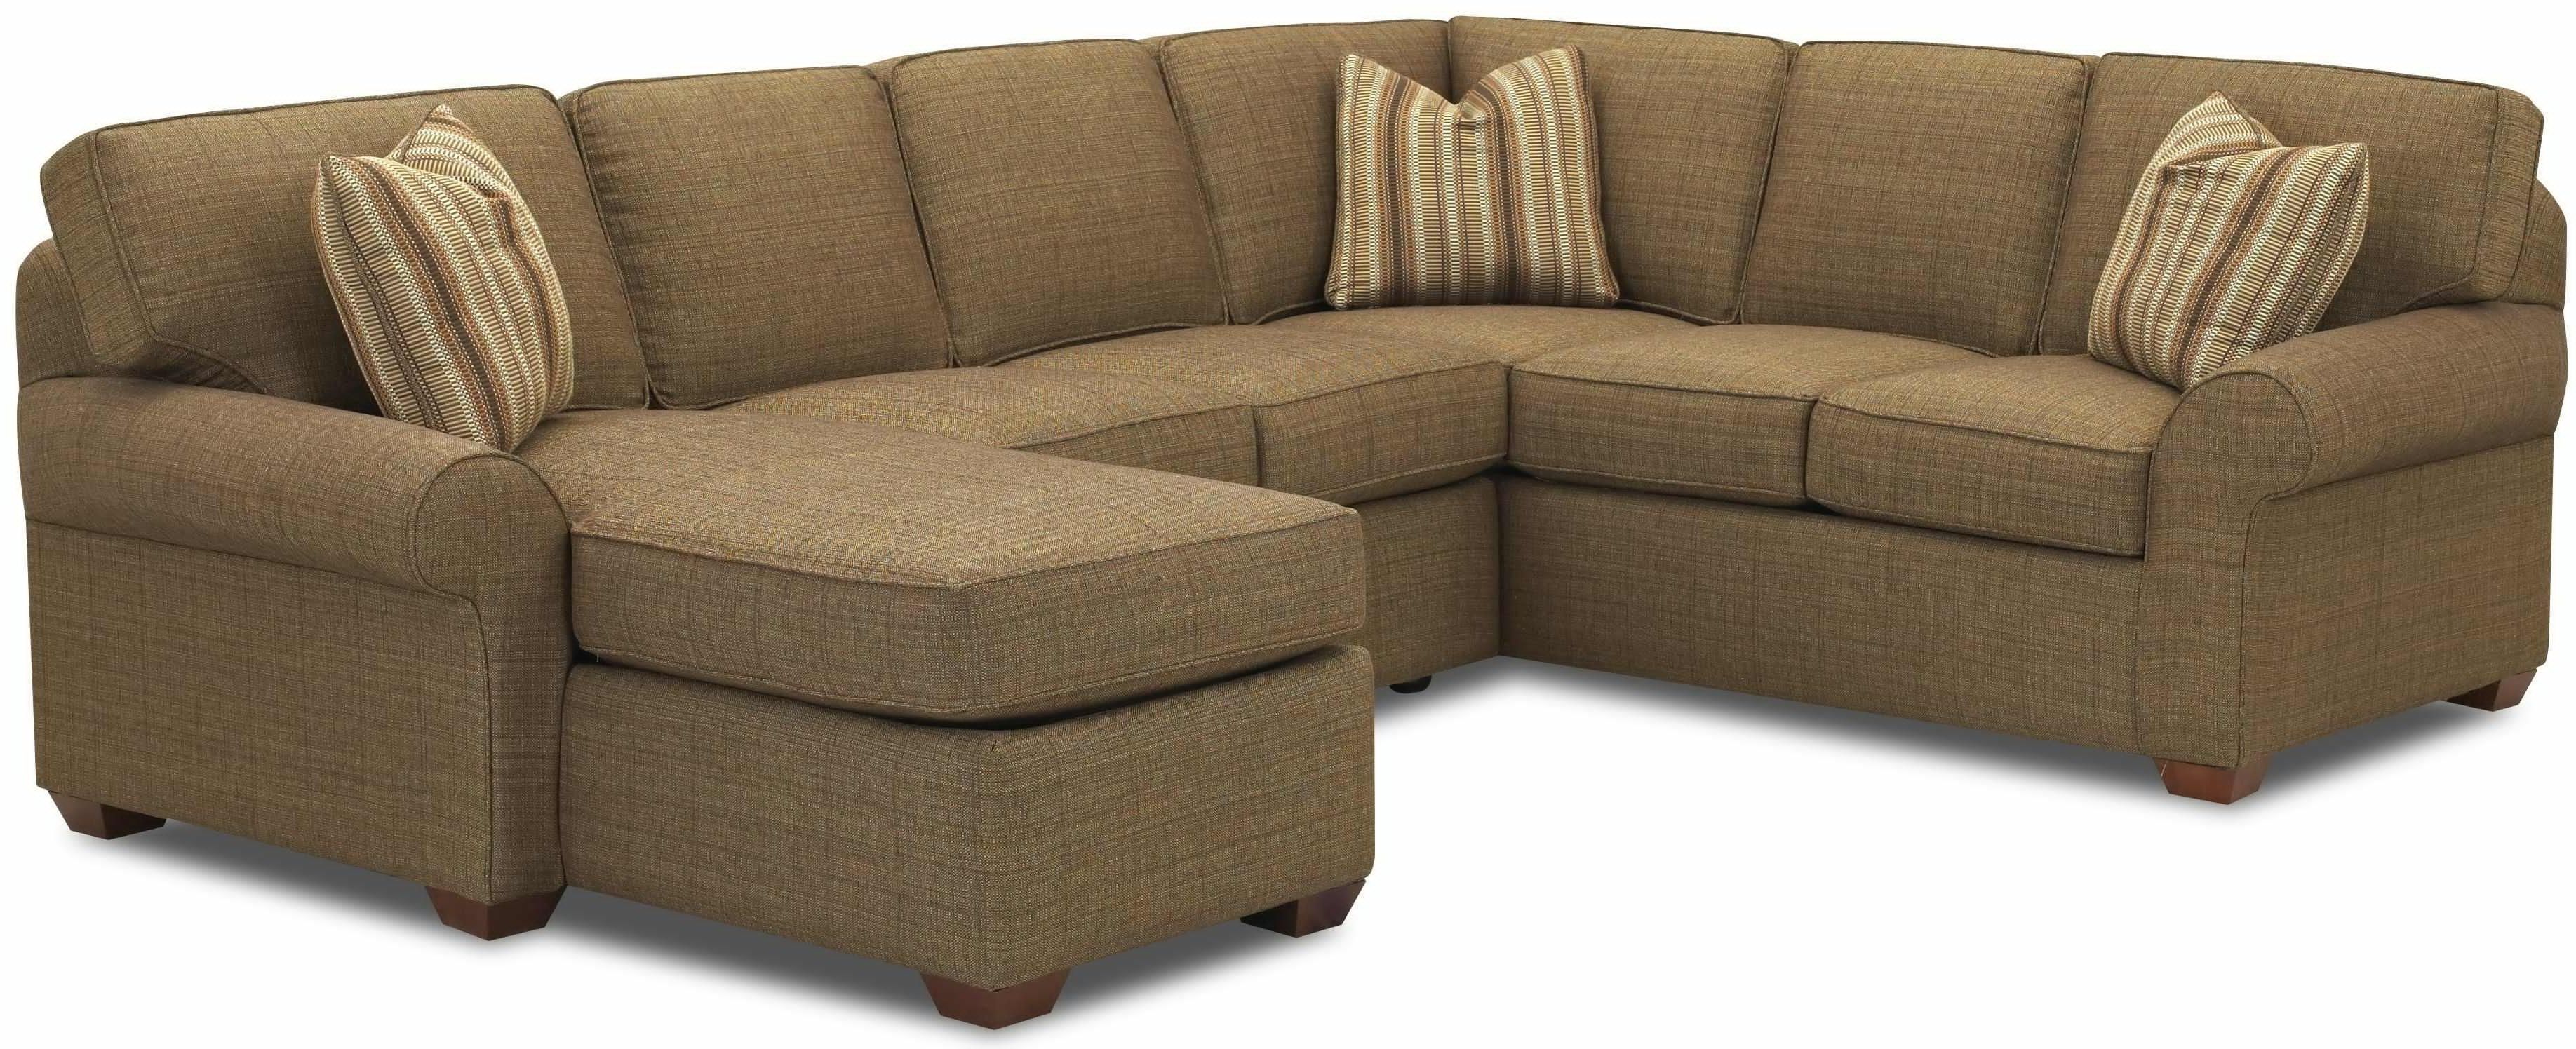 Sectional Sofa Design: Small Sectional Sofa With Chaise Lounge With Preferred Chaise Lounge Sectionals (Photo 9 of 15)